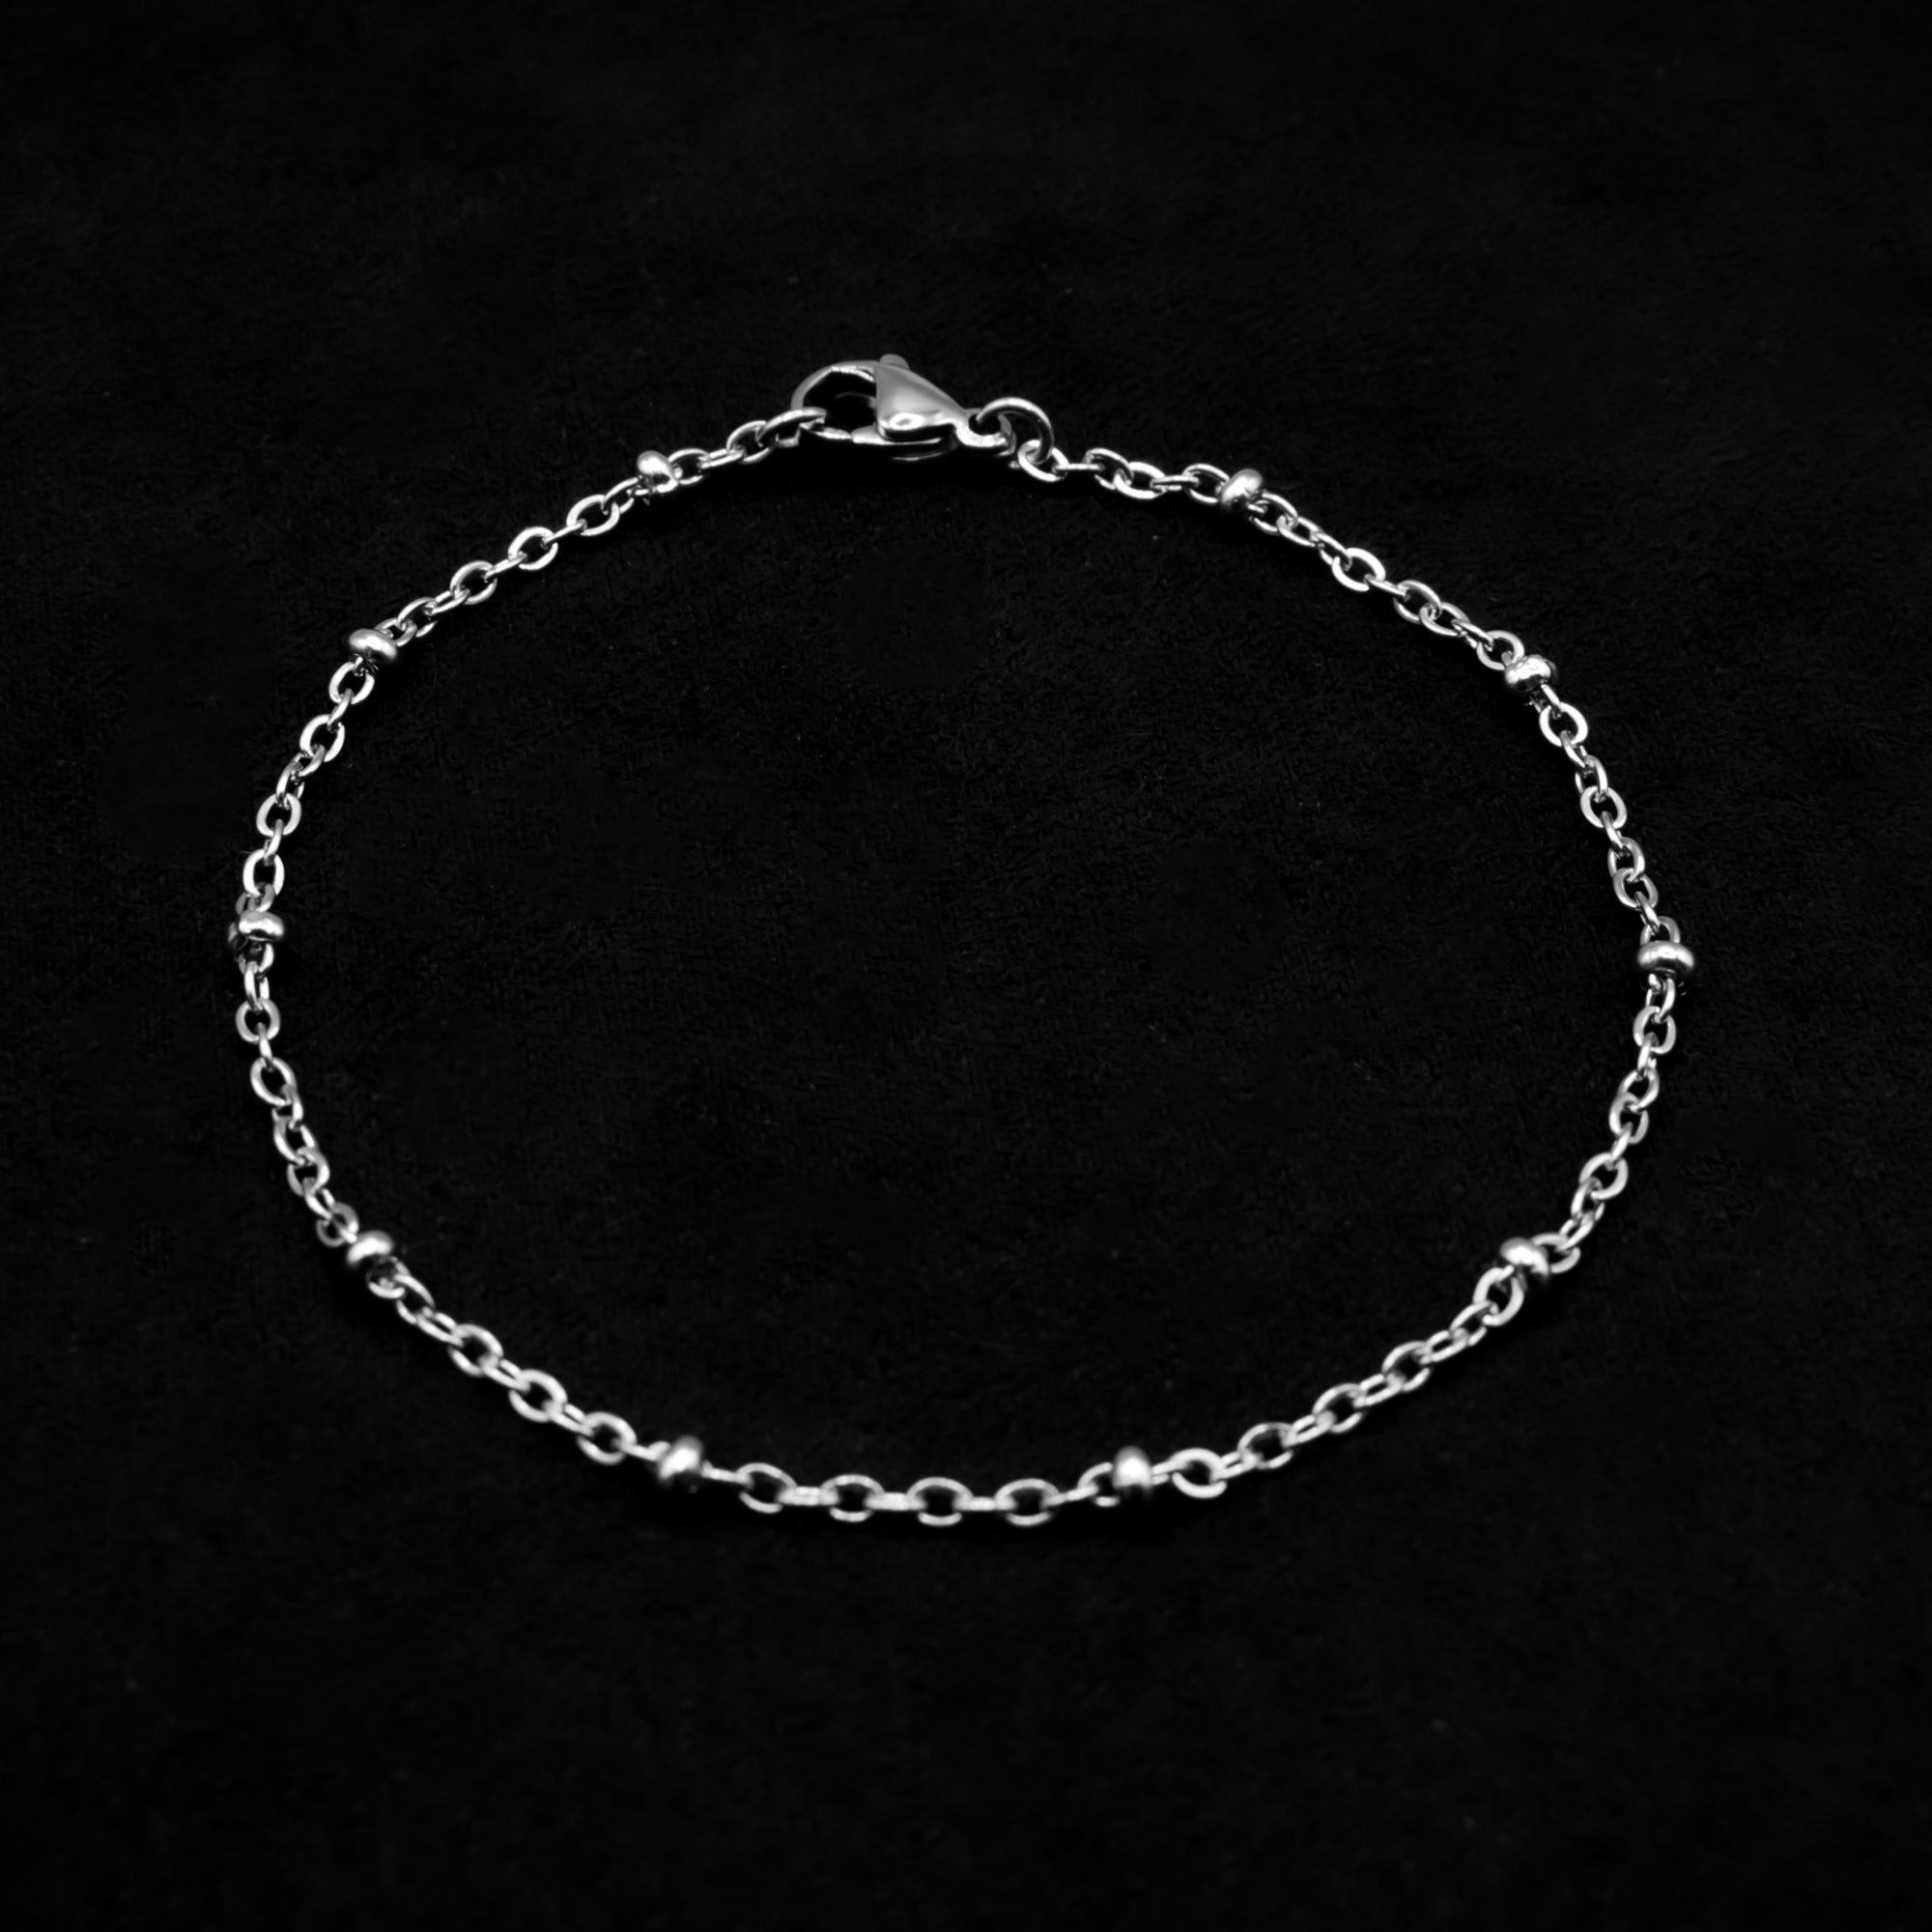 Satellite Cable Chain Bracelet - (Silver) 2mm